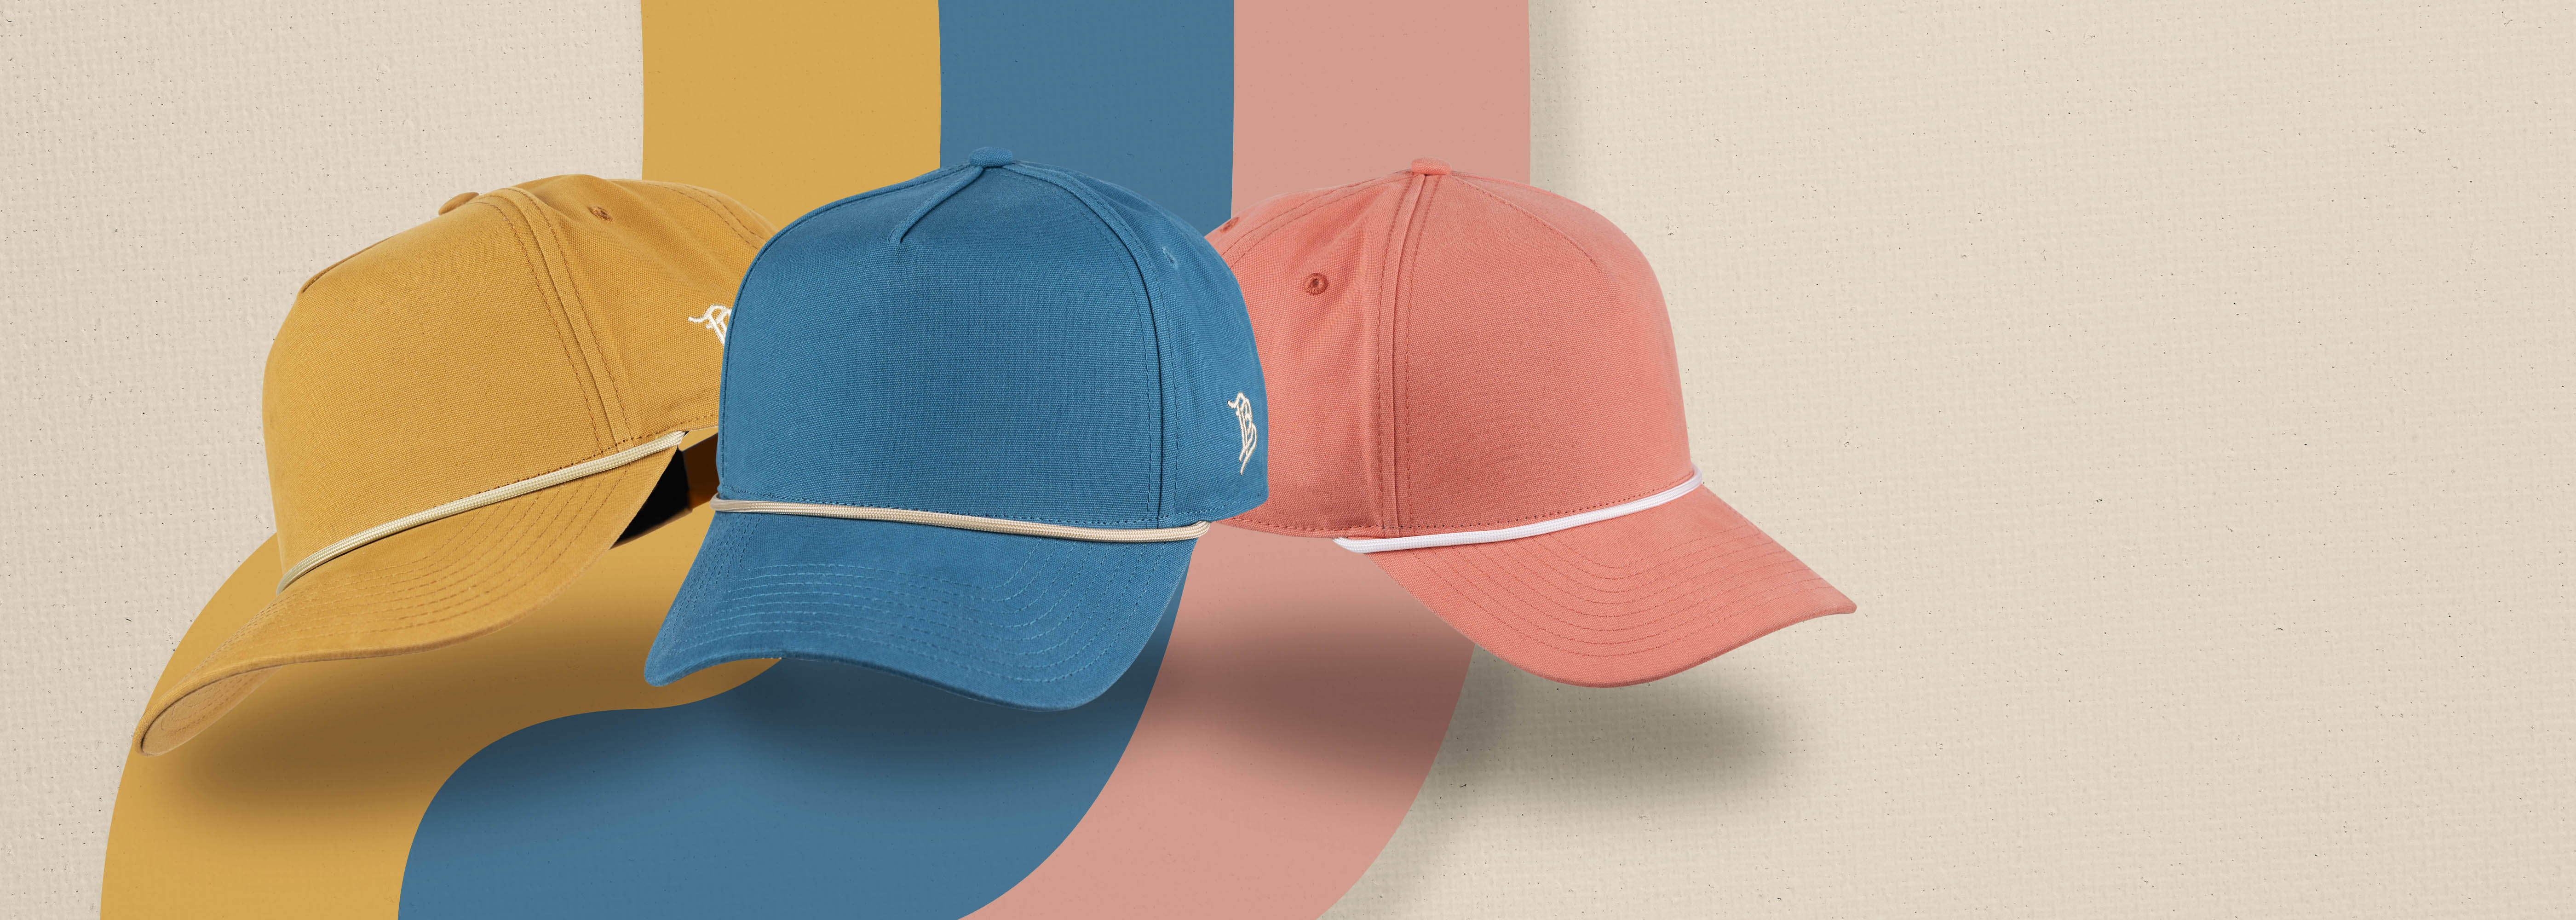 Canvas hats with wavy stripes